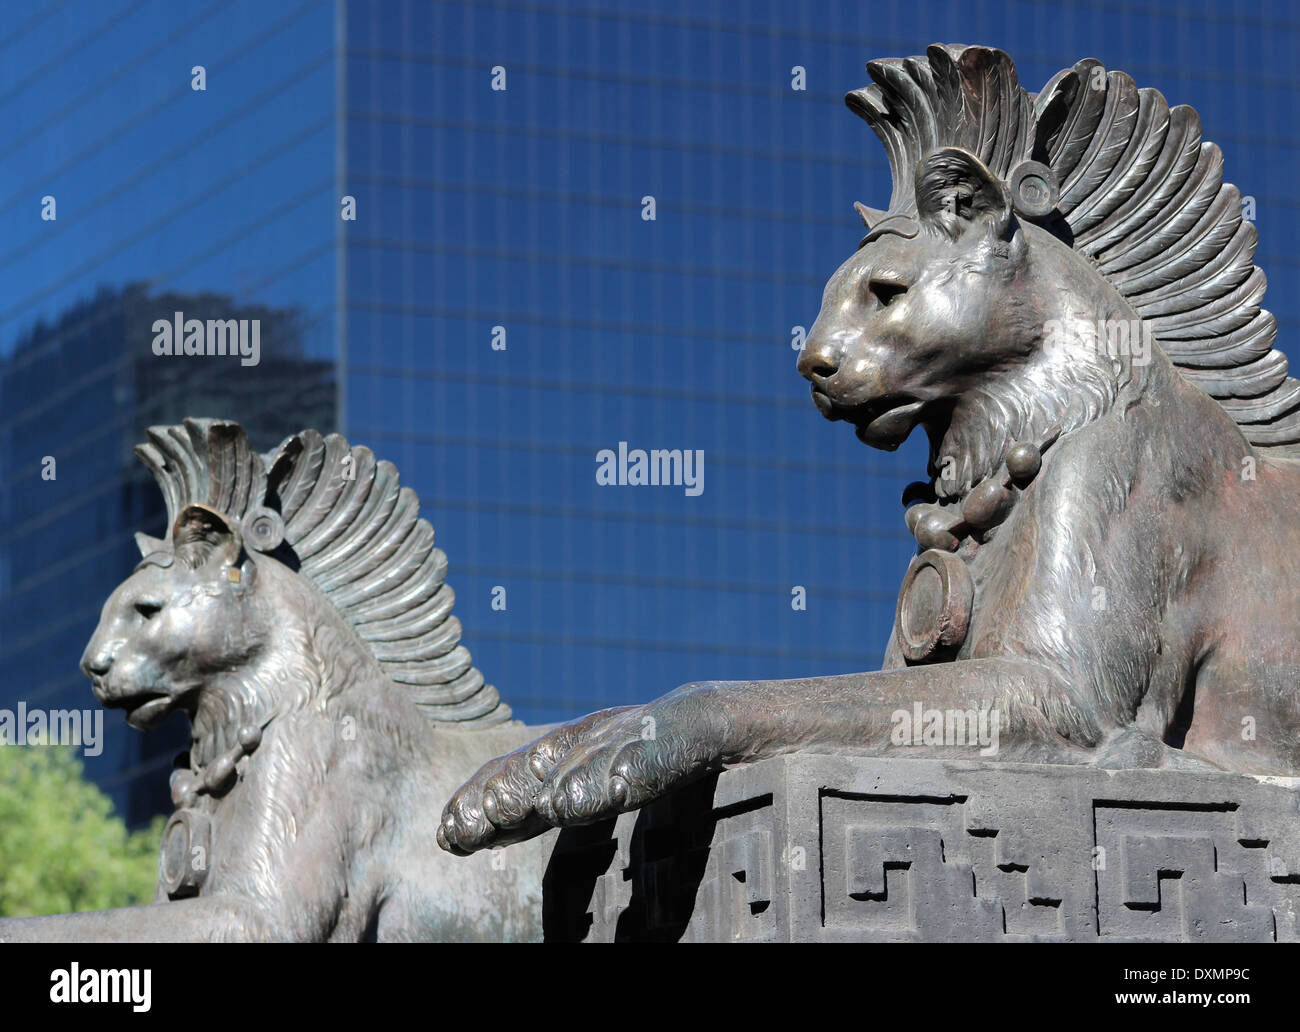 Two of the bronze leopards with feathered headdresses at the base of the Monument to Cuautemoc, Paseo de la Reforma, Mexico City Stock Photo